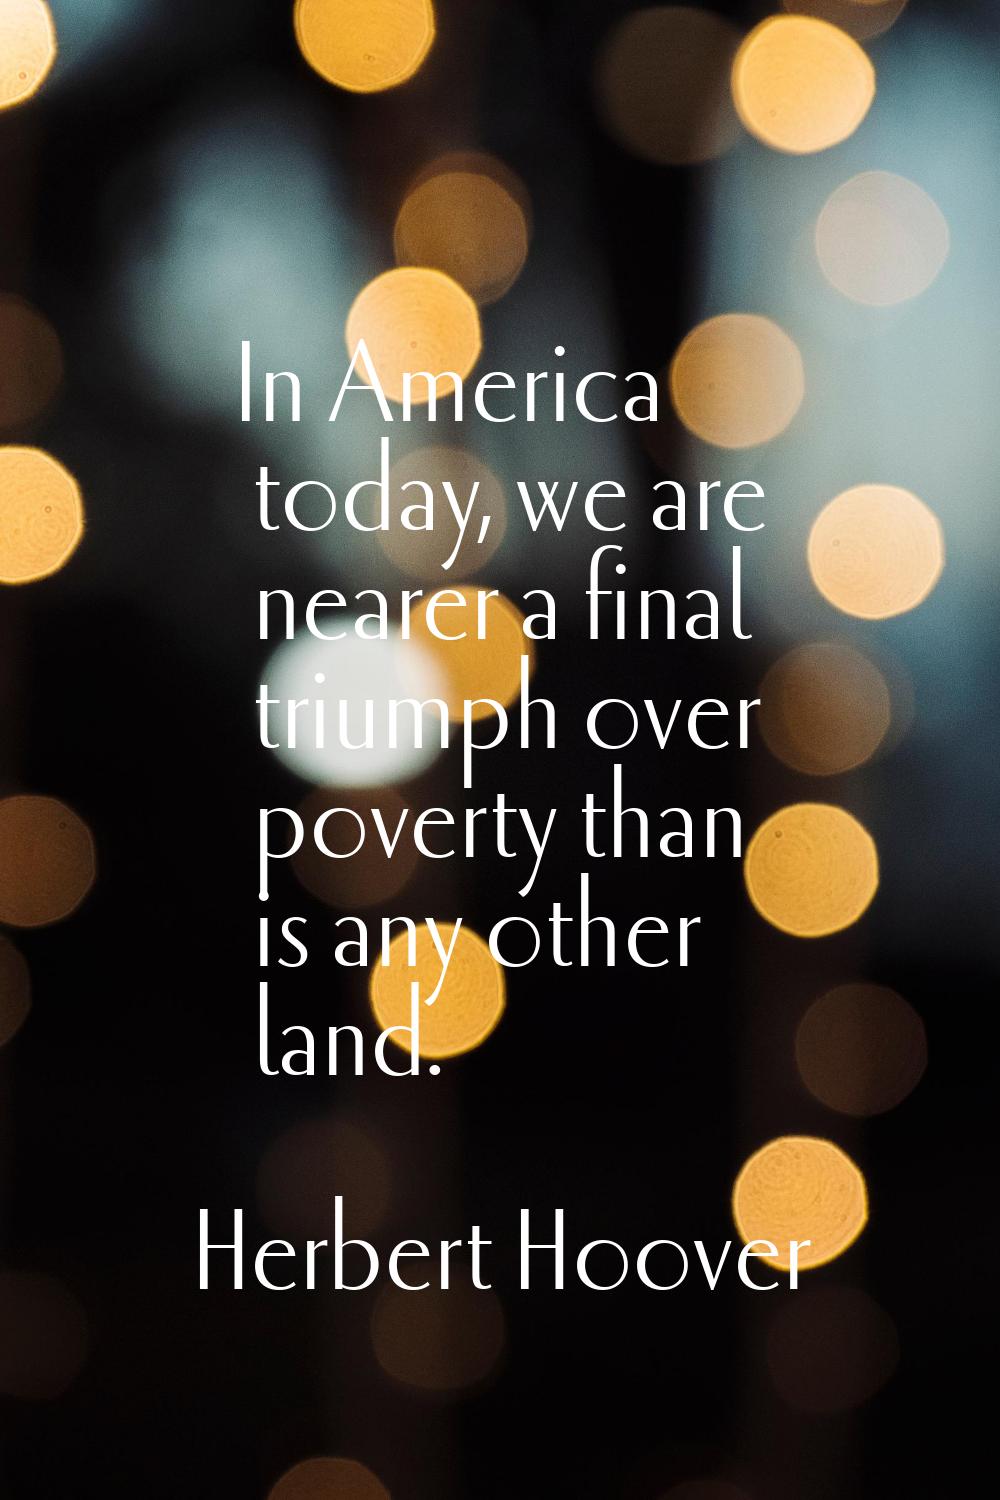 In America today, we are nearer a final triumph over poverty than is any other land.